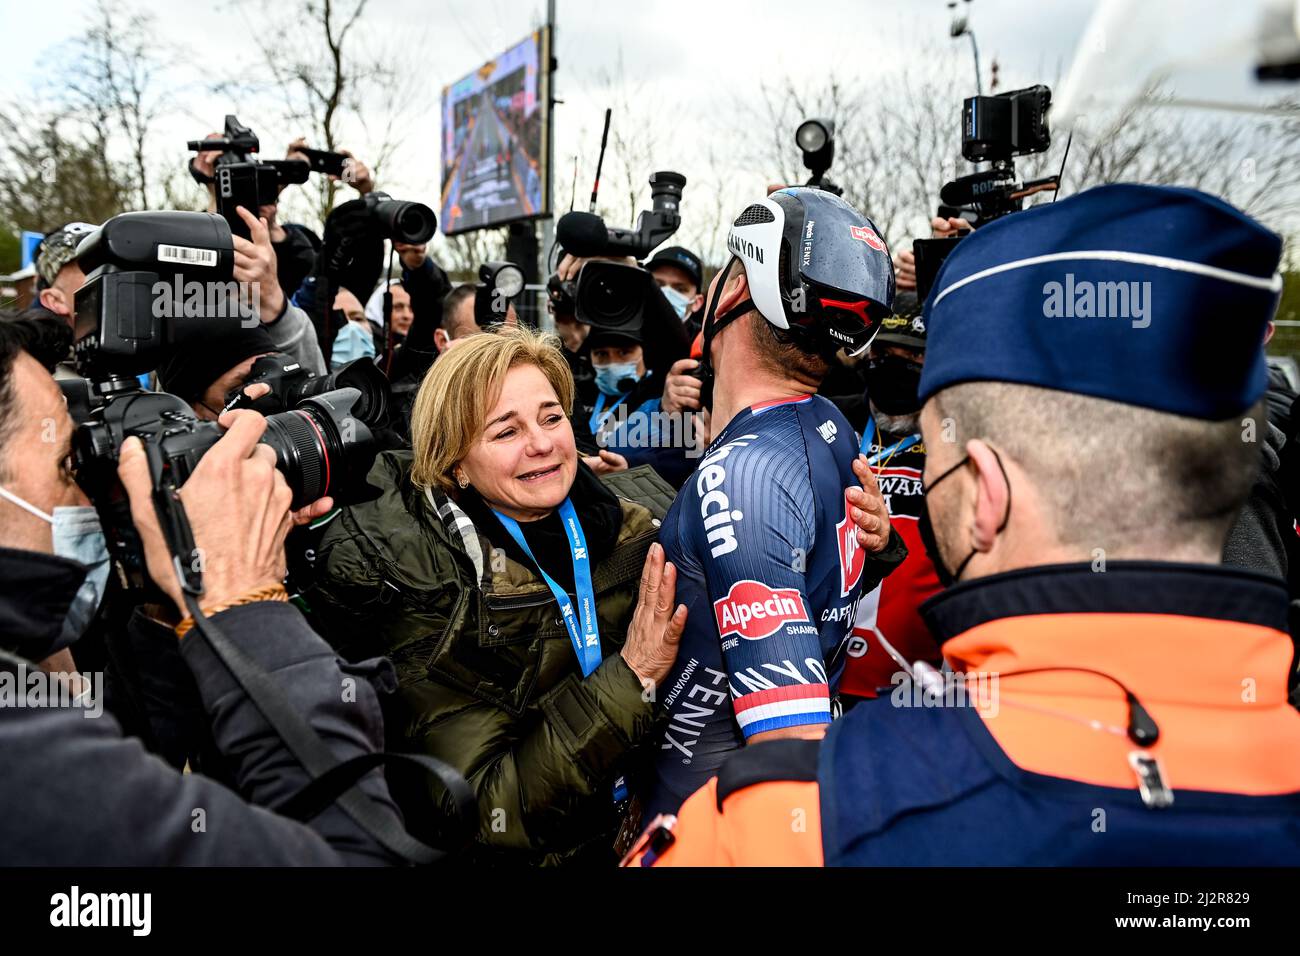 Belgium. 3rd April 2022, Belgium. The 2022 Tour of Flanders from Antwerp (Antwerpen) to Oudenaarde. Mathieu Van Der Poel for team AlpecinFenix (NED) embraces his mother on the finish line after winning the stage. Credit: Peter Goding/Alamy Live News Stock Photo